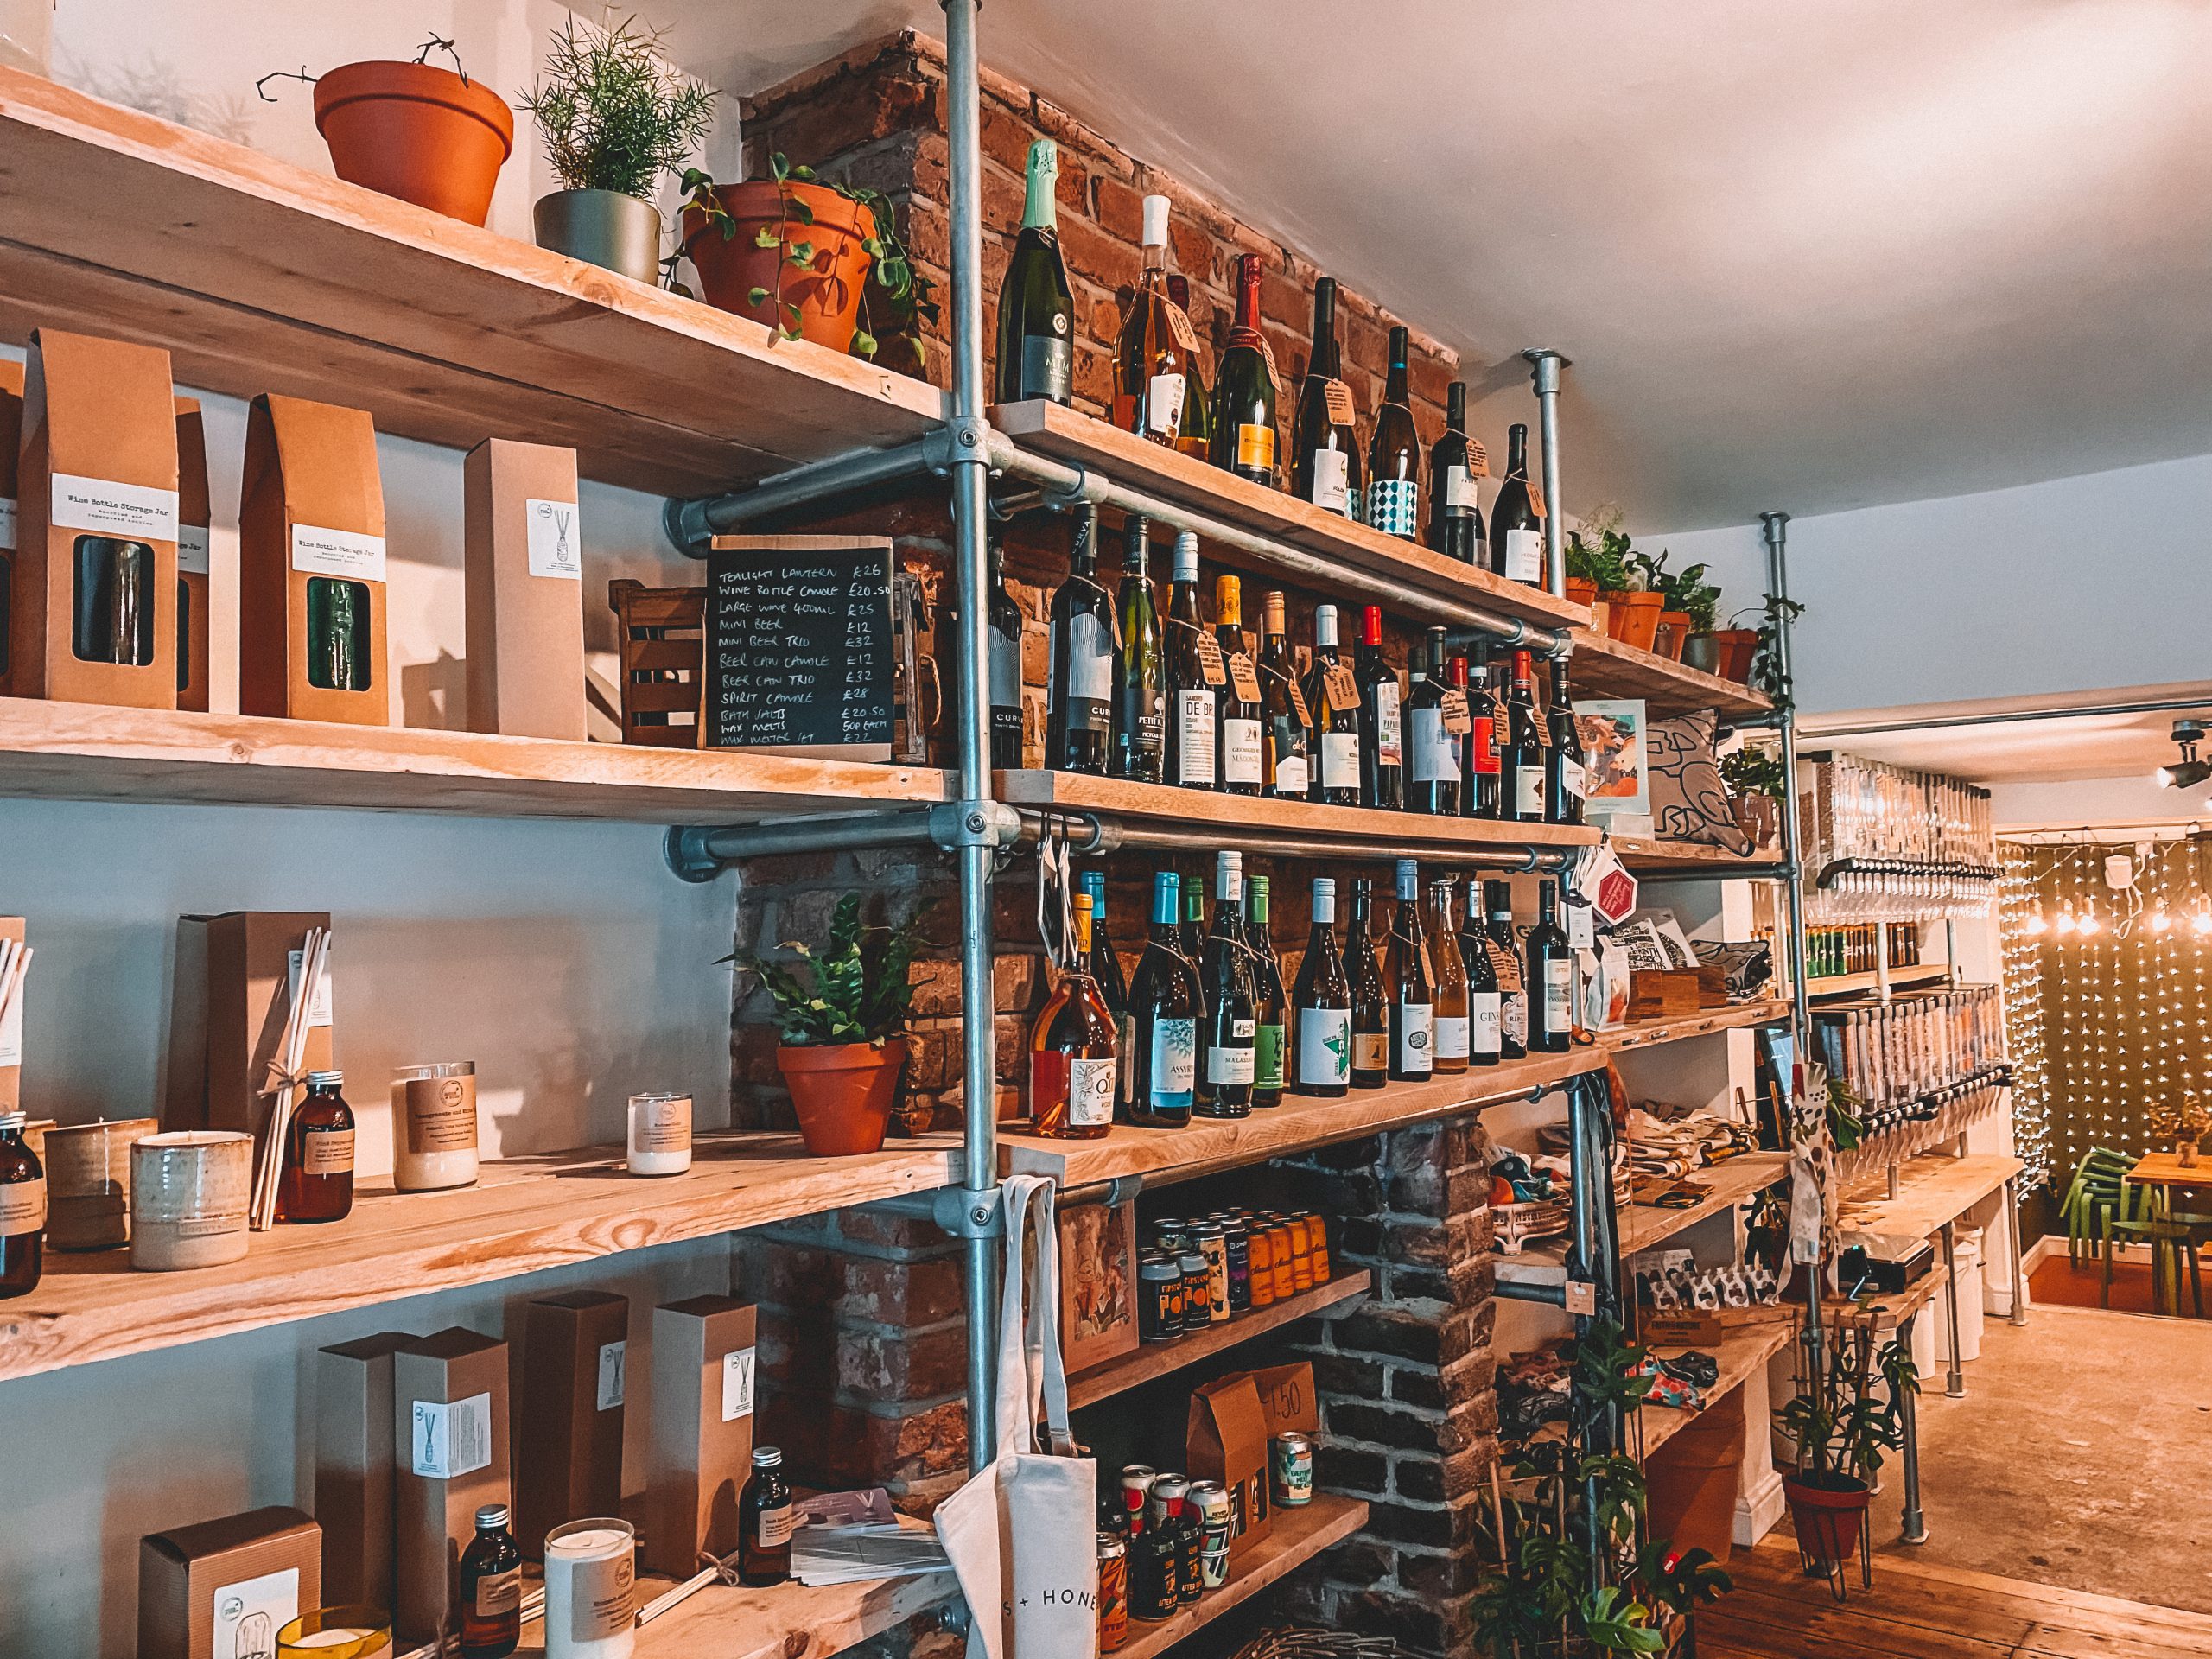 shelves inside a store filled with homemade candles, wine bottles, beers and gifts